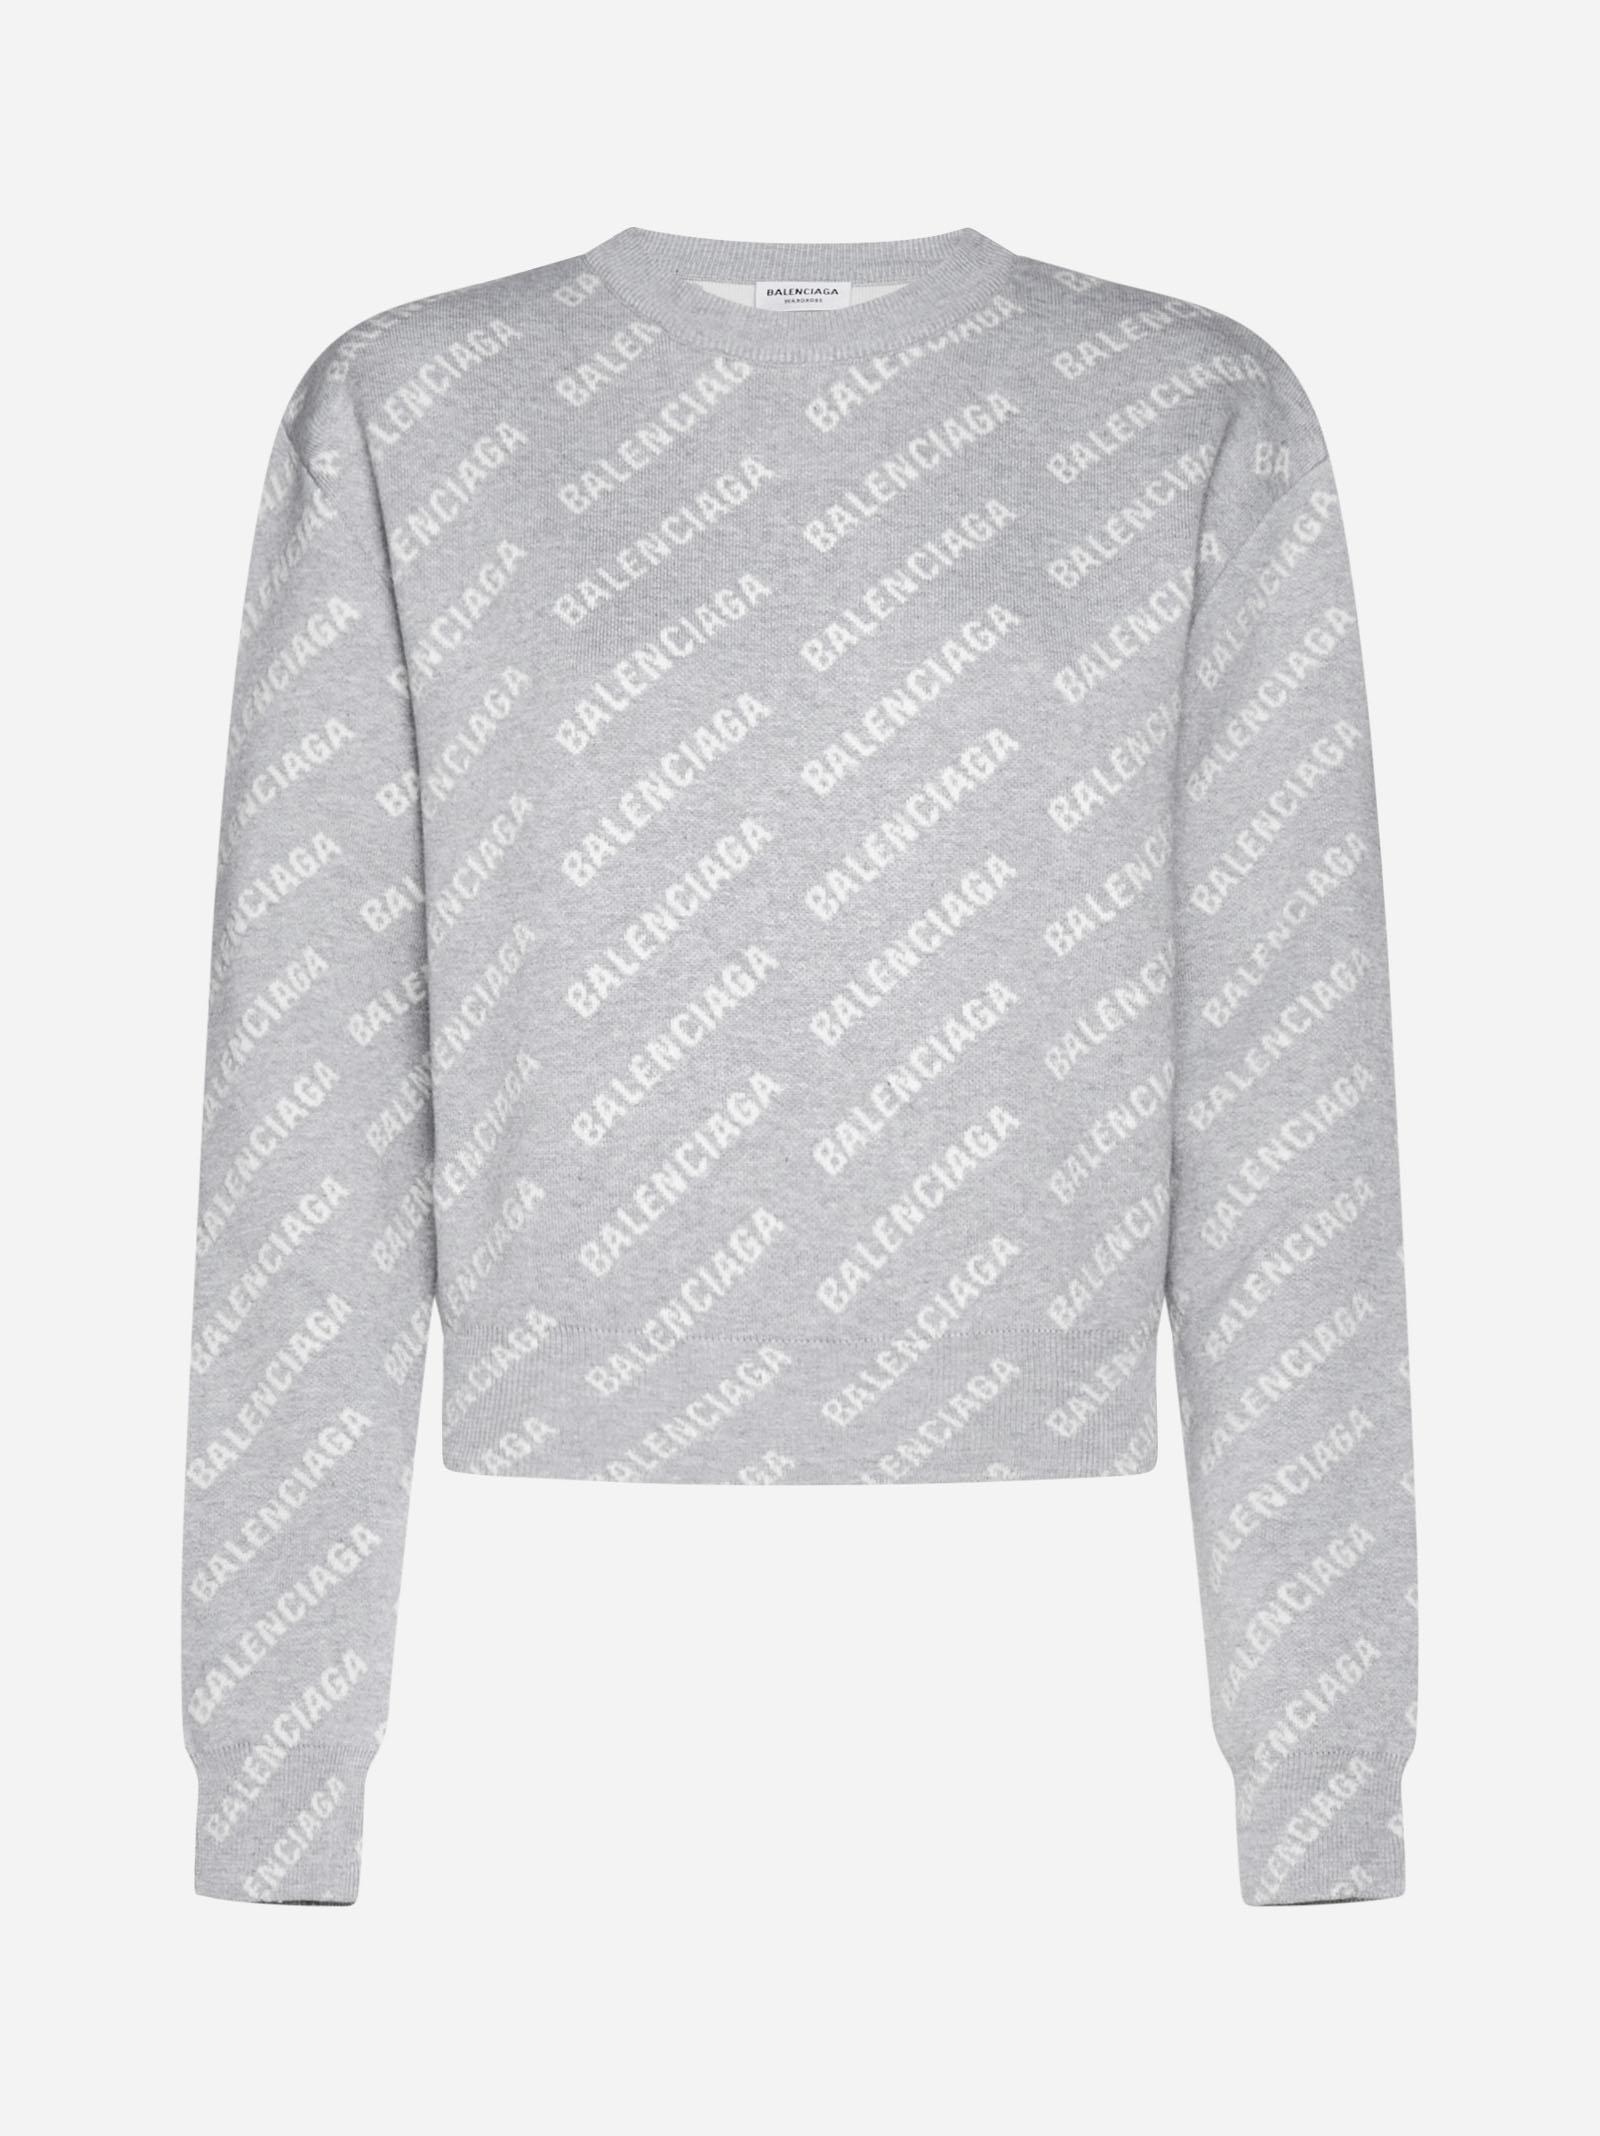 Balenciaga Cropped Sweater in Gray | Lyst